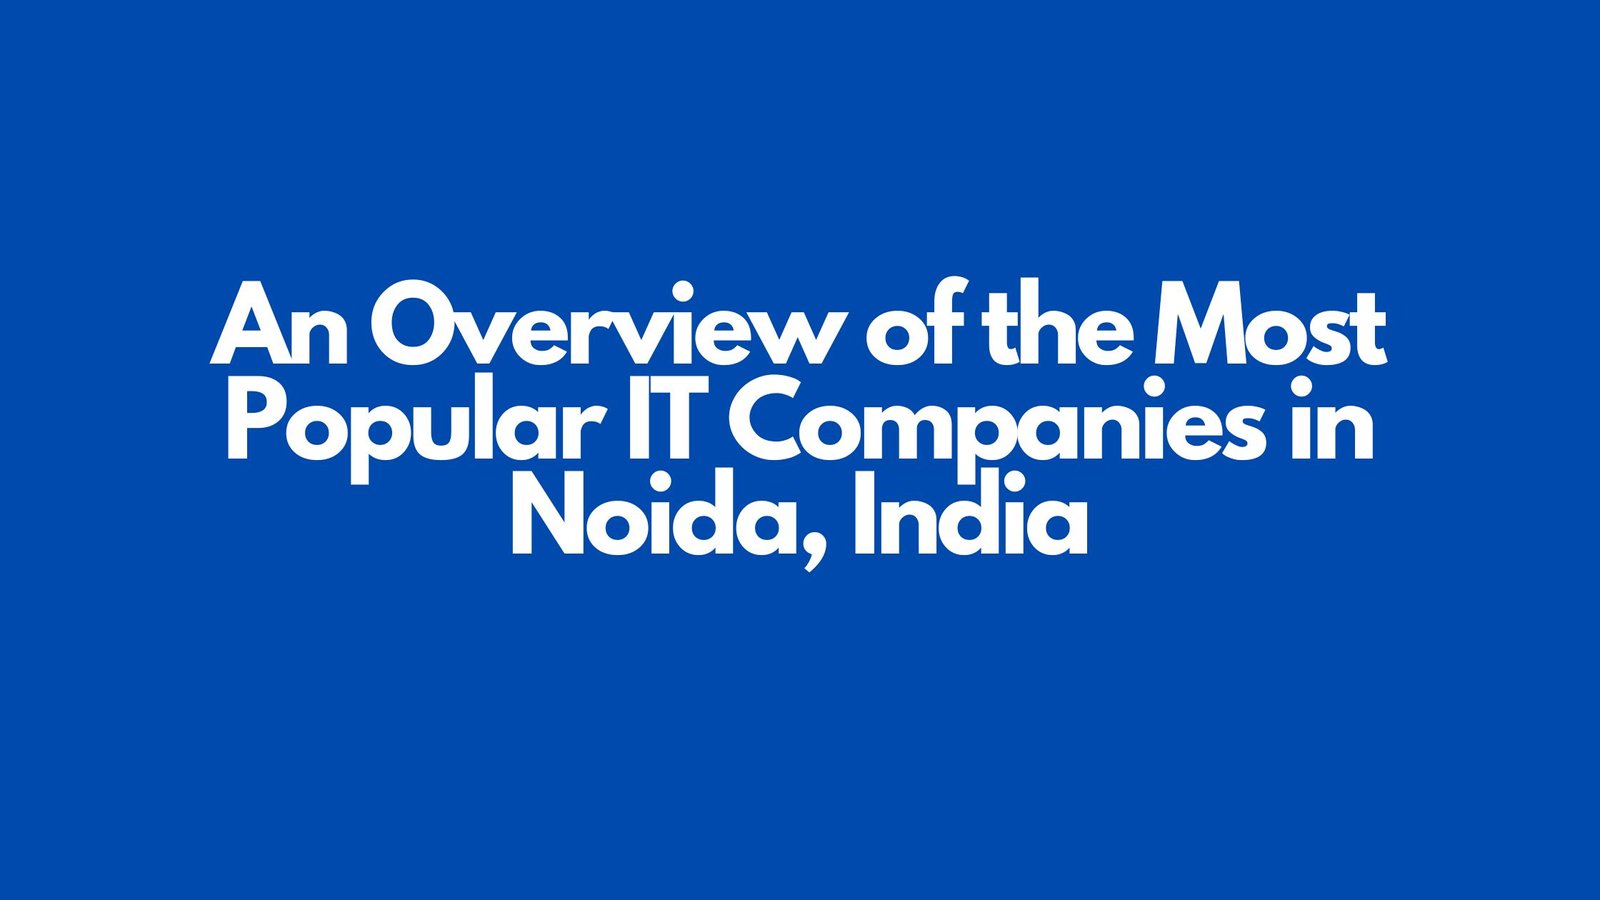 You are currently viewing An Overview of the Most Popular IT Companies in Noida, India